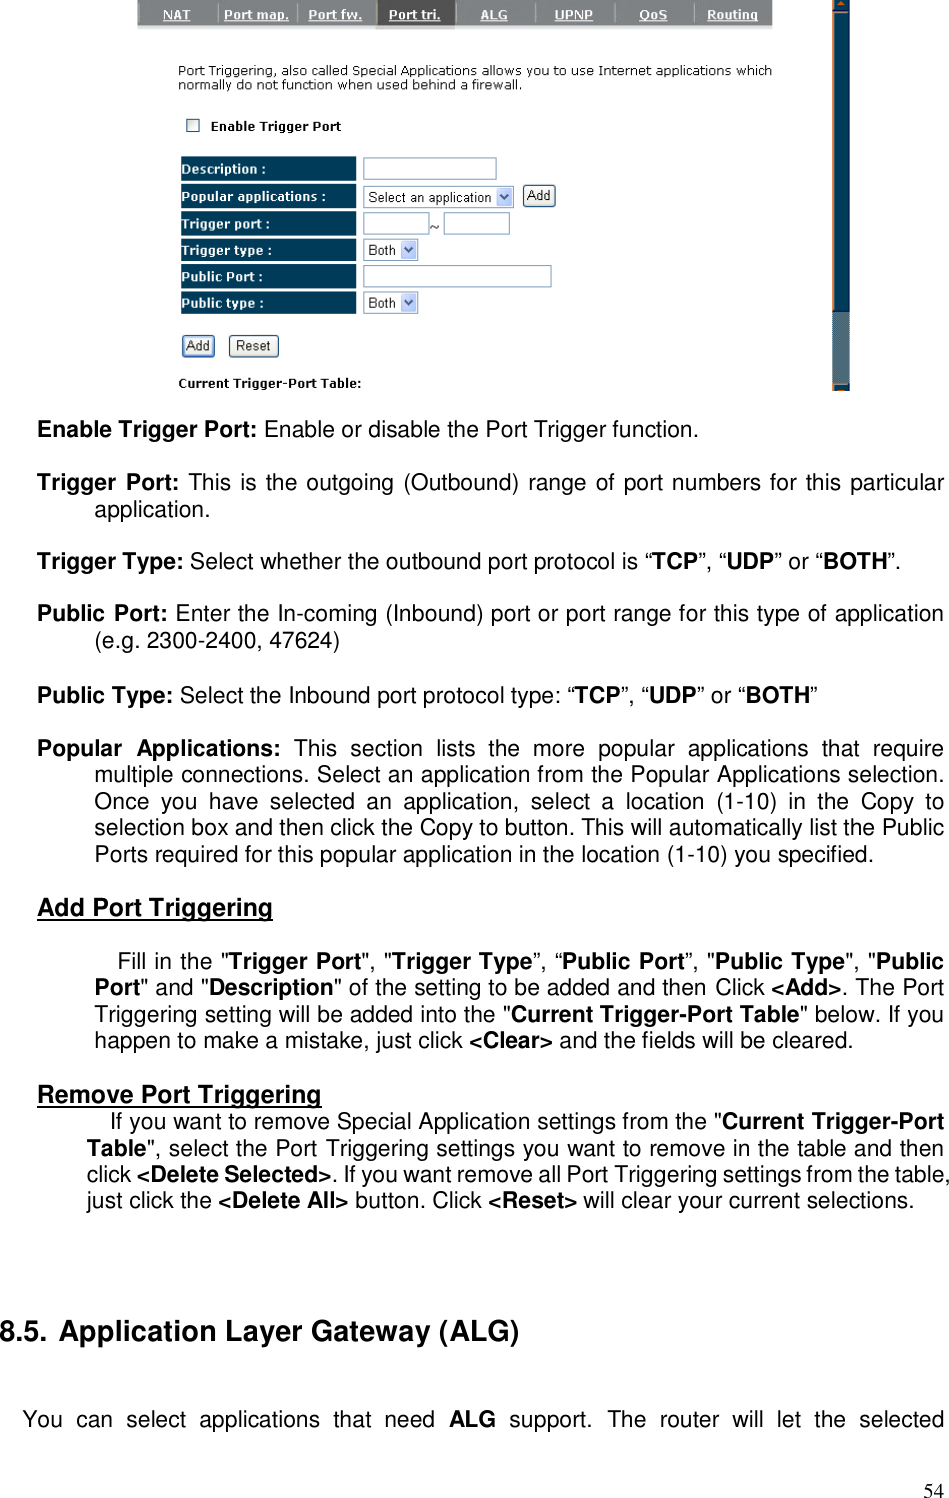  54   Enable Trigger Port: Enable or disable the Port Trigger function.  Trigger Port: This is the outgoing (Outbound) range of port numbers for this particular application.  Trigger Type: Select whether the outbound port protocol is “TCP”, “UDP” or “BOTH”.  Public Port: Enter the In-coming (Inbound) port or port range for this type of application (e.g. 2300-2400, 47624)    Public Type: Select the Inbound port protocol type: “TCP”, “UDP” or “BOTH”  Popular  Applications:  This  section  lists  the  more  popular  applications  that  require multiple connections. Select an application from the Popular Applications selection. Once  you  have  selected  an  application,  select  a  location  (1-10)  in  the  Copy  to selection box and then click the Copy to button. This will automatically list the Public Ports required for this popular application in the location (1-10) you specified.  Add Port Triggering  Fill in the &quot;Trigger Port&quot;, &quot;Trigger Type”, “Public Port”, &quot;Public Type&quot;, &quot;Public Port&quot; and &quot;Description&quot; of the setting to be added and then Click &lt;Add&gt;. The Port Triggering setting will be added into the &quot;Current Trigger-Port Table&quot; below. If you happen to make a mistake, just click &lt;Clear&gt; and the fields will be cleared.   Remove Port Triggering   If you want to remove Special Application settings from the &quot;Current Trigger-Port Table&quot;, select the Port Triggering settings you want to remove in the table and then click &lt;Delete Selected&gt;. If you want remove all Port Triggering settings from the table, just click the &lt;Delete All&gt; button. Click &lt;Reset&gt; will clear your current selections.    8.5. Application Layer Gateway (ALG)  You  can  select  applications  that  need  ALG  support.  The  router  will  let  the  selected 